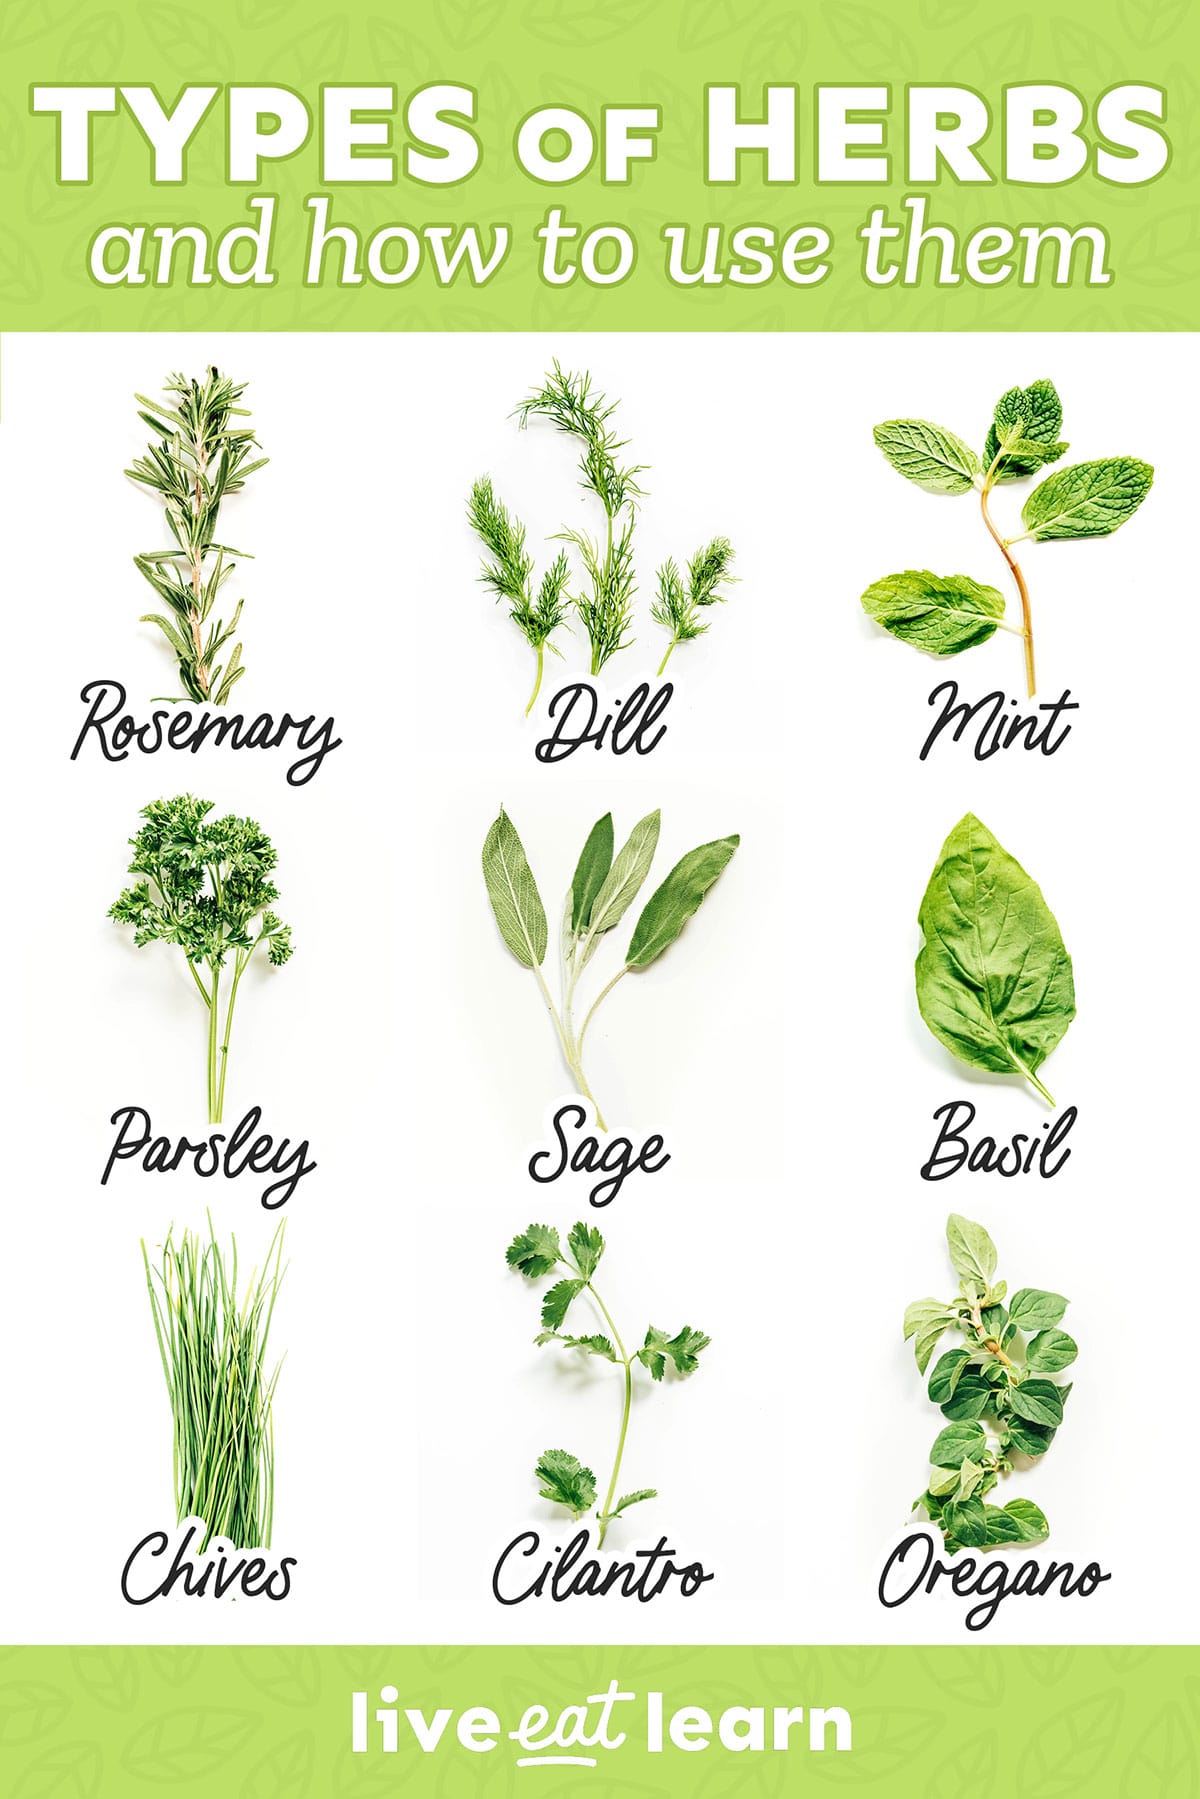 How to Use Herbs in Marinades For Grilling Meats